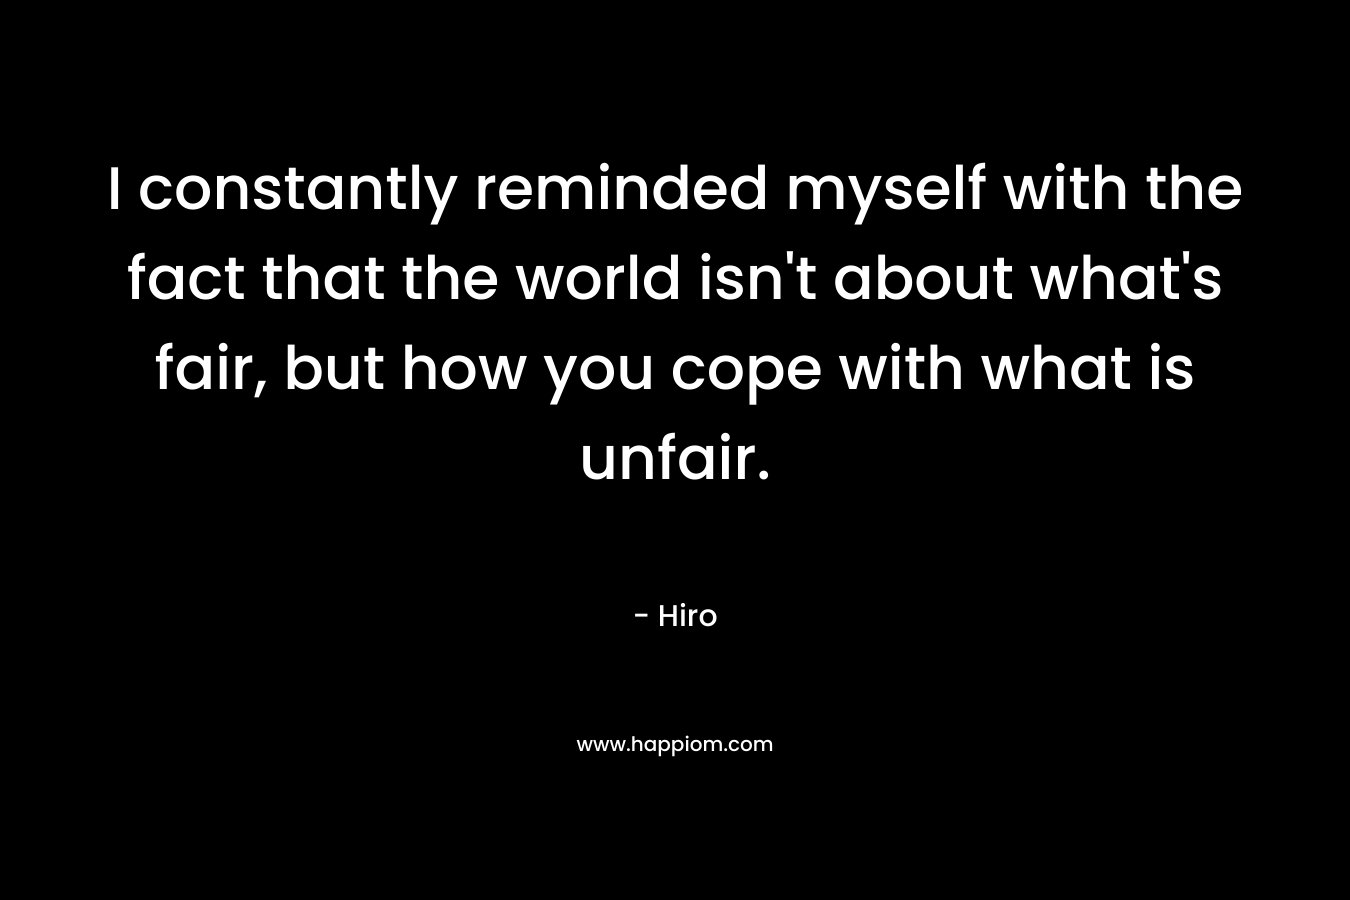 I constantly reminded myself with the fact that the world isn’t about what’s fair, but how you cope with what is unfair. – Hiro